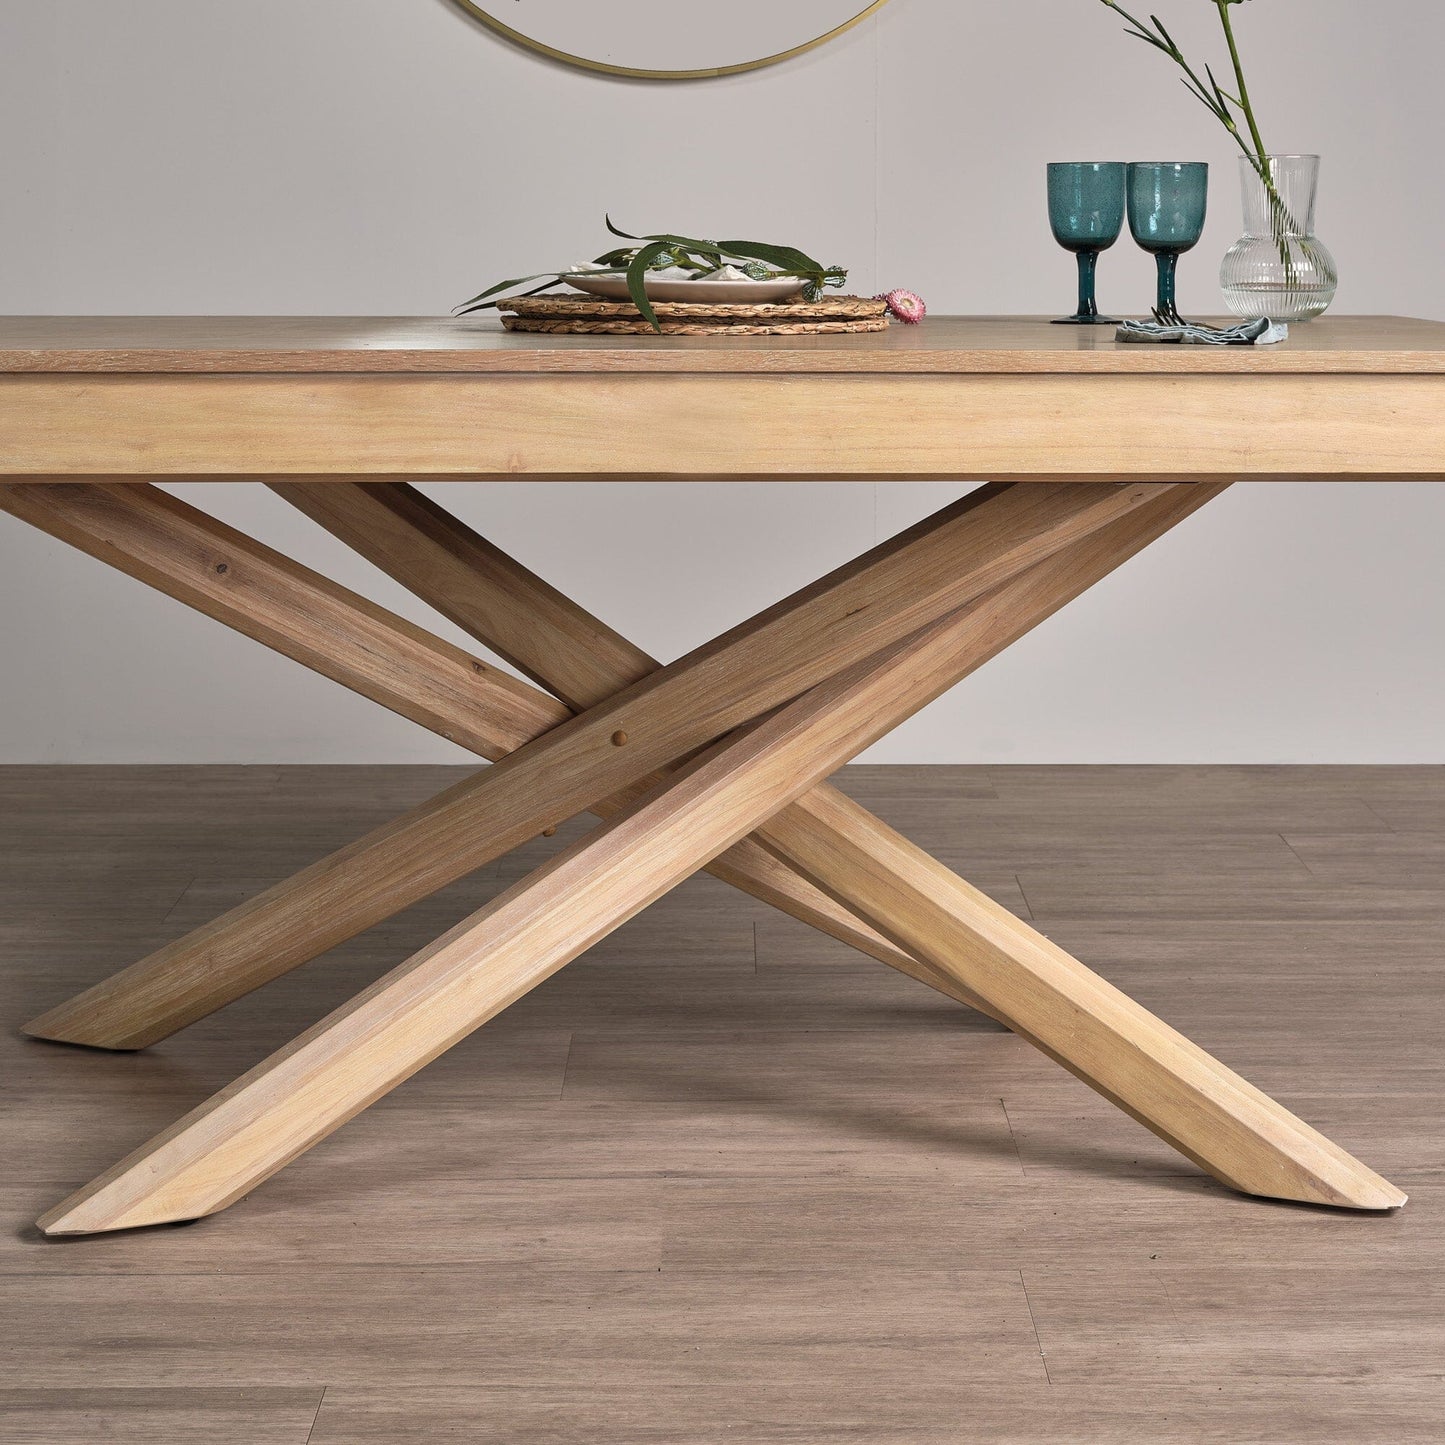 Amelia Whitewash dining table - 6 seater - Ella Pale Oak wooden chairs